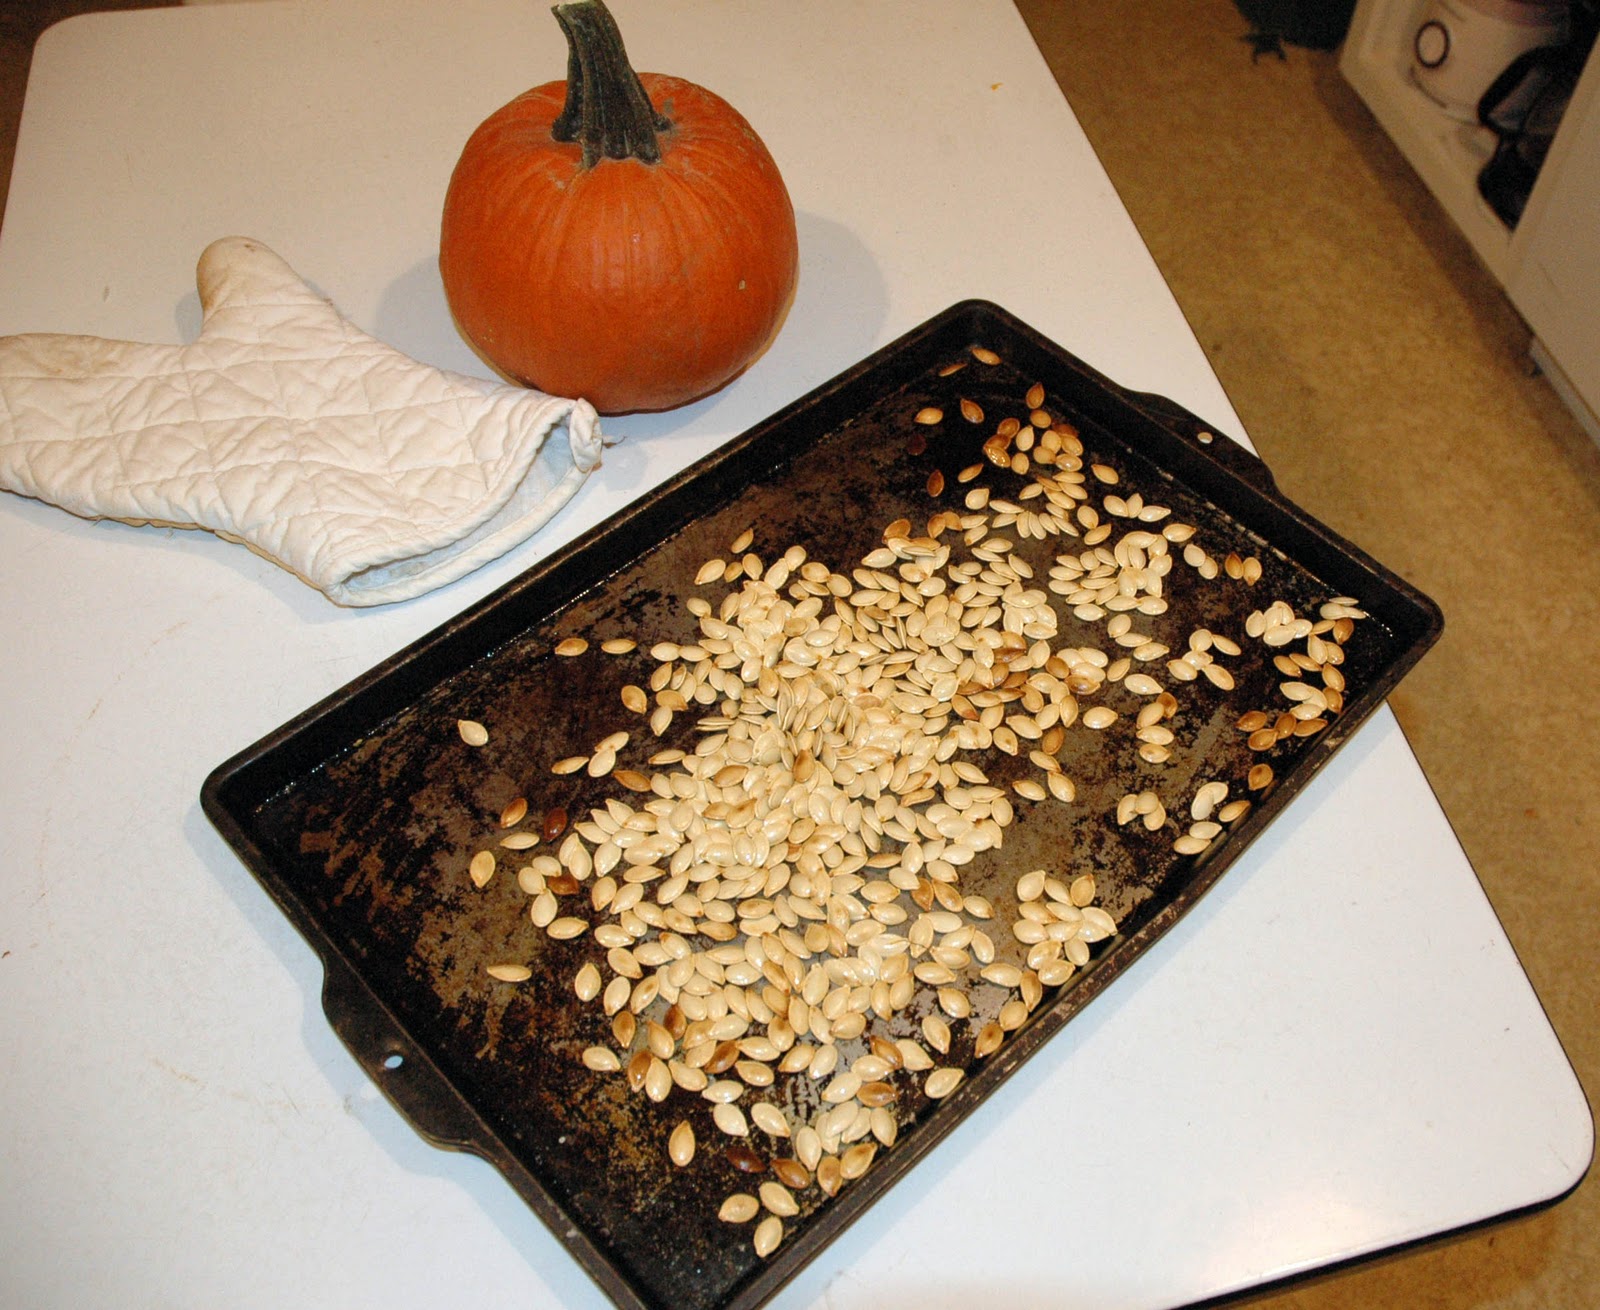 Reticulated Writer: How to kill a pumpkin